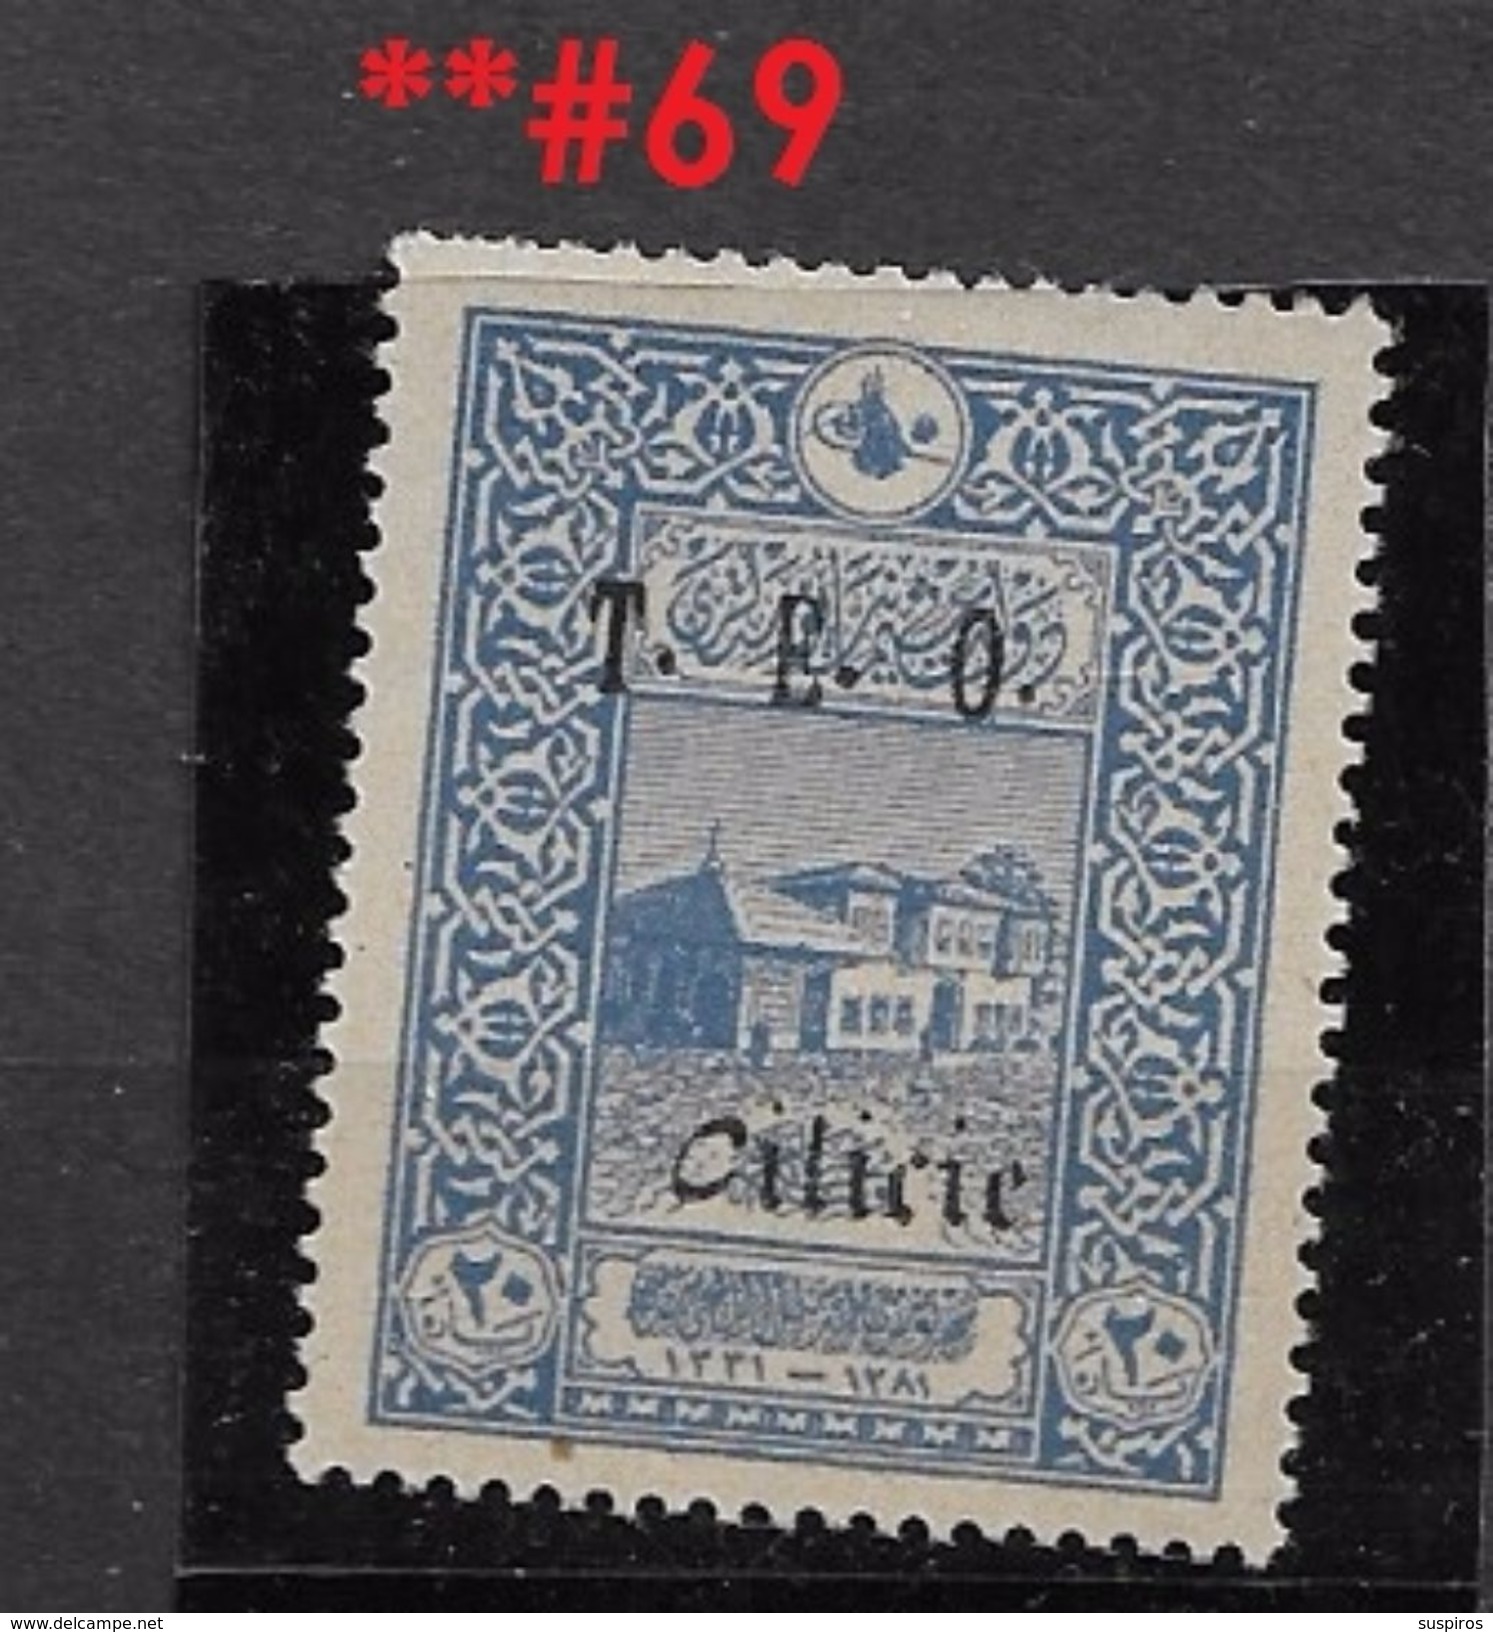 CILICIA  YVERT 69 **1919 Turkish Postage Stamps Of 1916 Handstamp Overprinted "CILICIE" T.E.O MNH - Unused Stamps